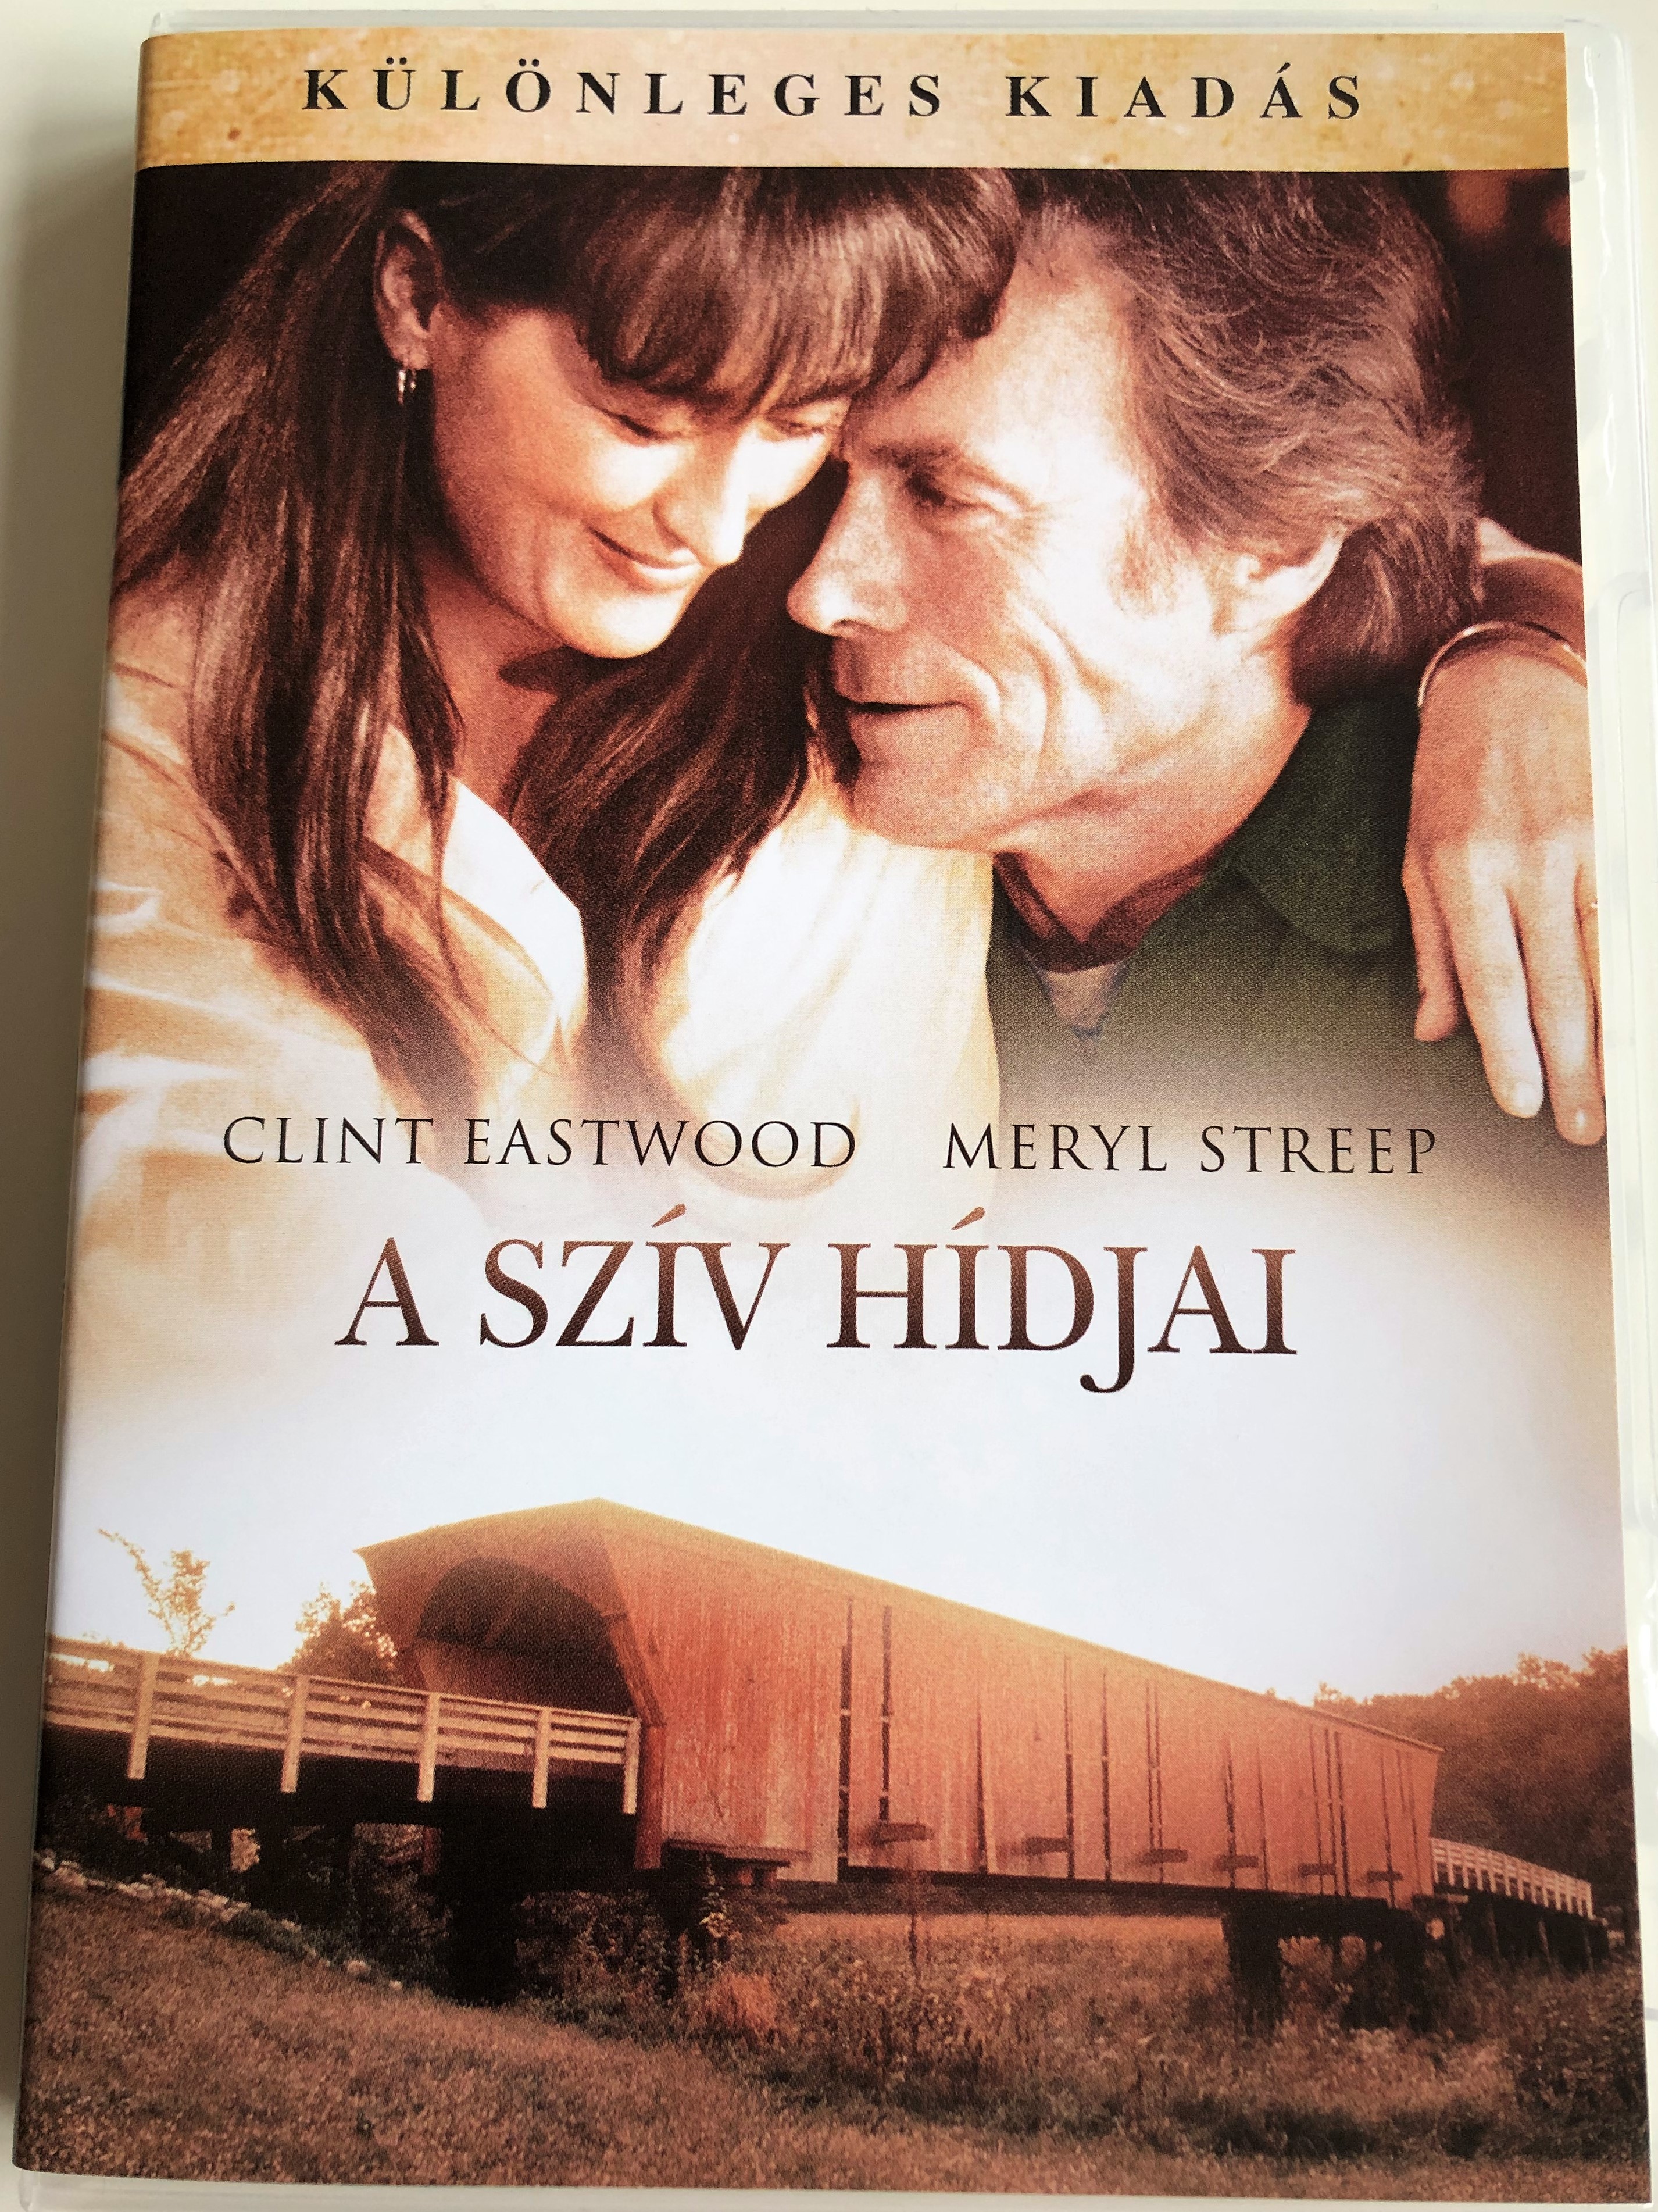 the-bridges-of-madison-county-dvd-1995-a-sz-v-h-djai-directed-by-clint-eastwood-starring-clint-eastwood-meryl-streep-special-edition-1-.jpg